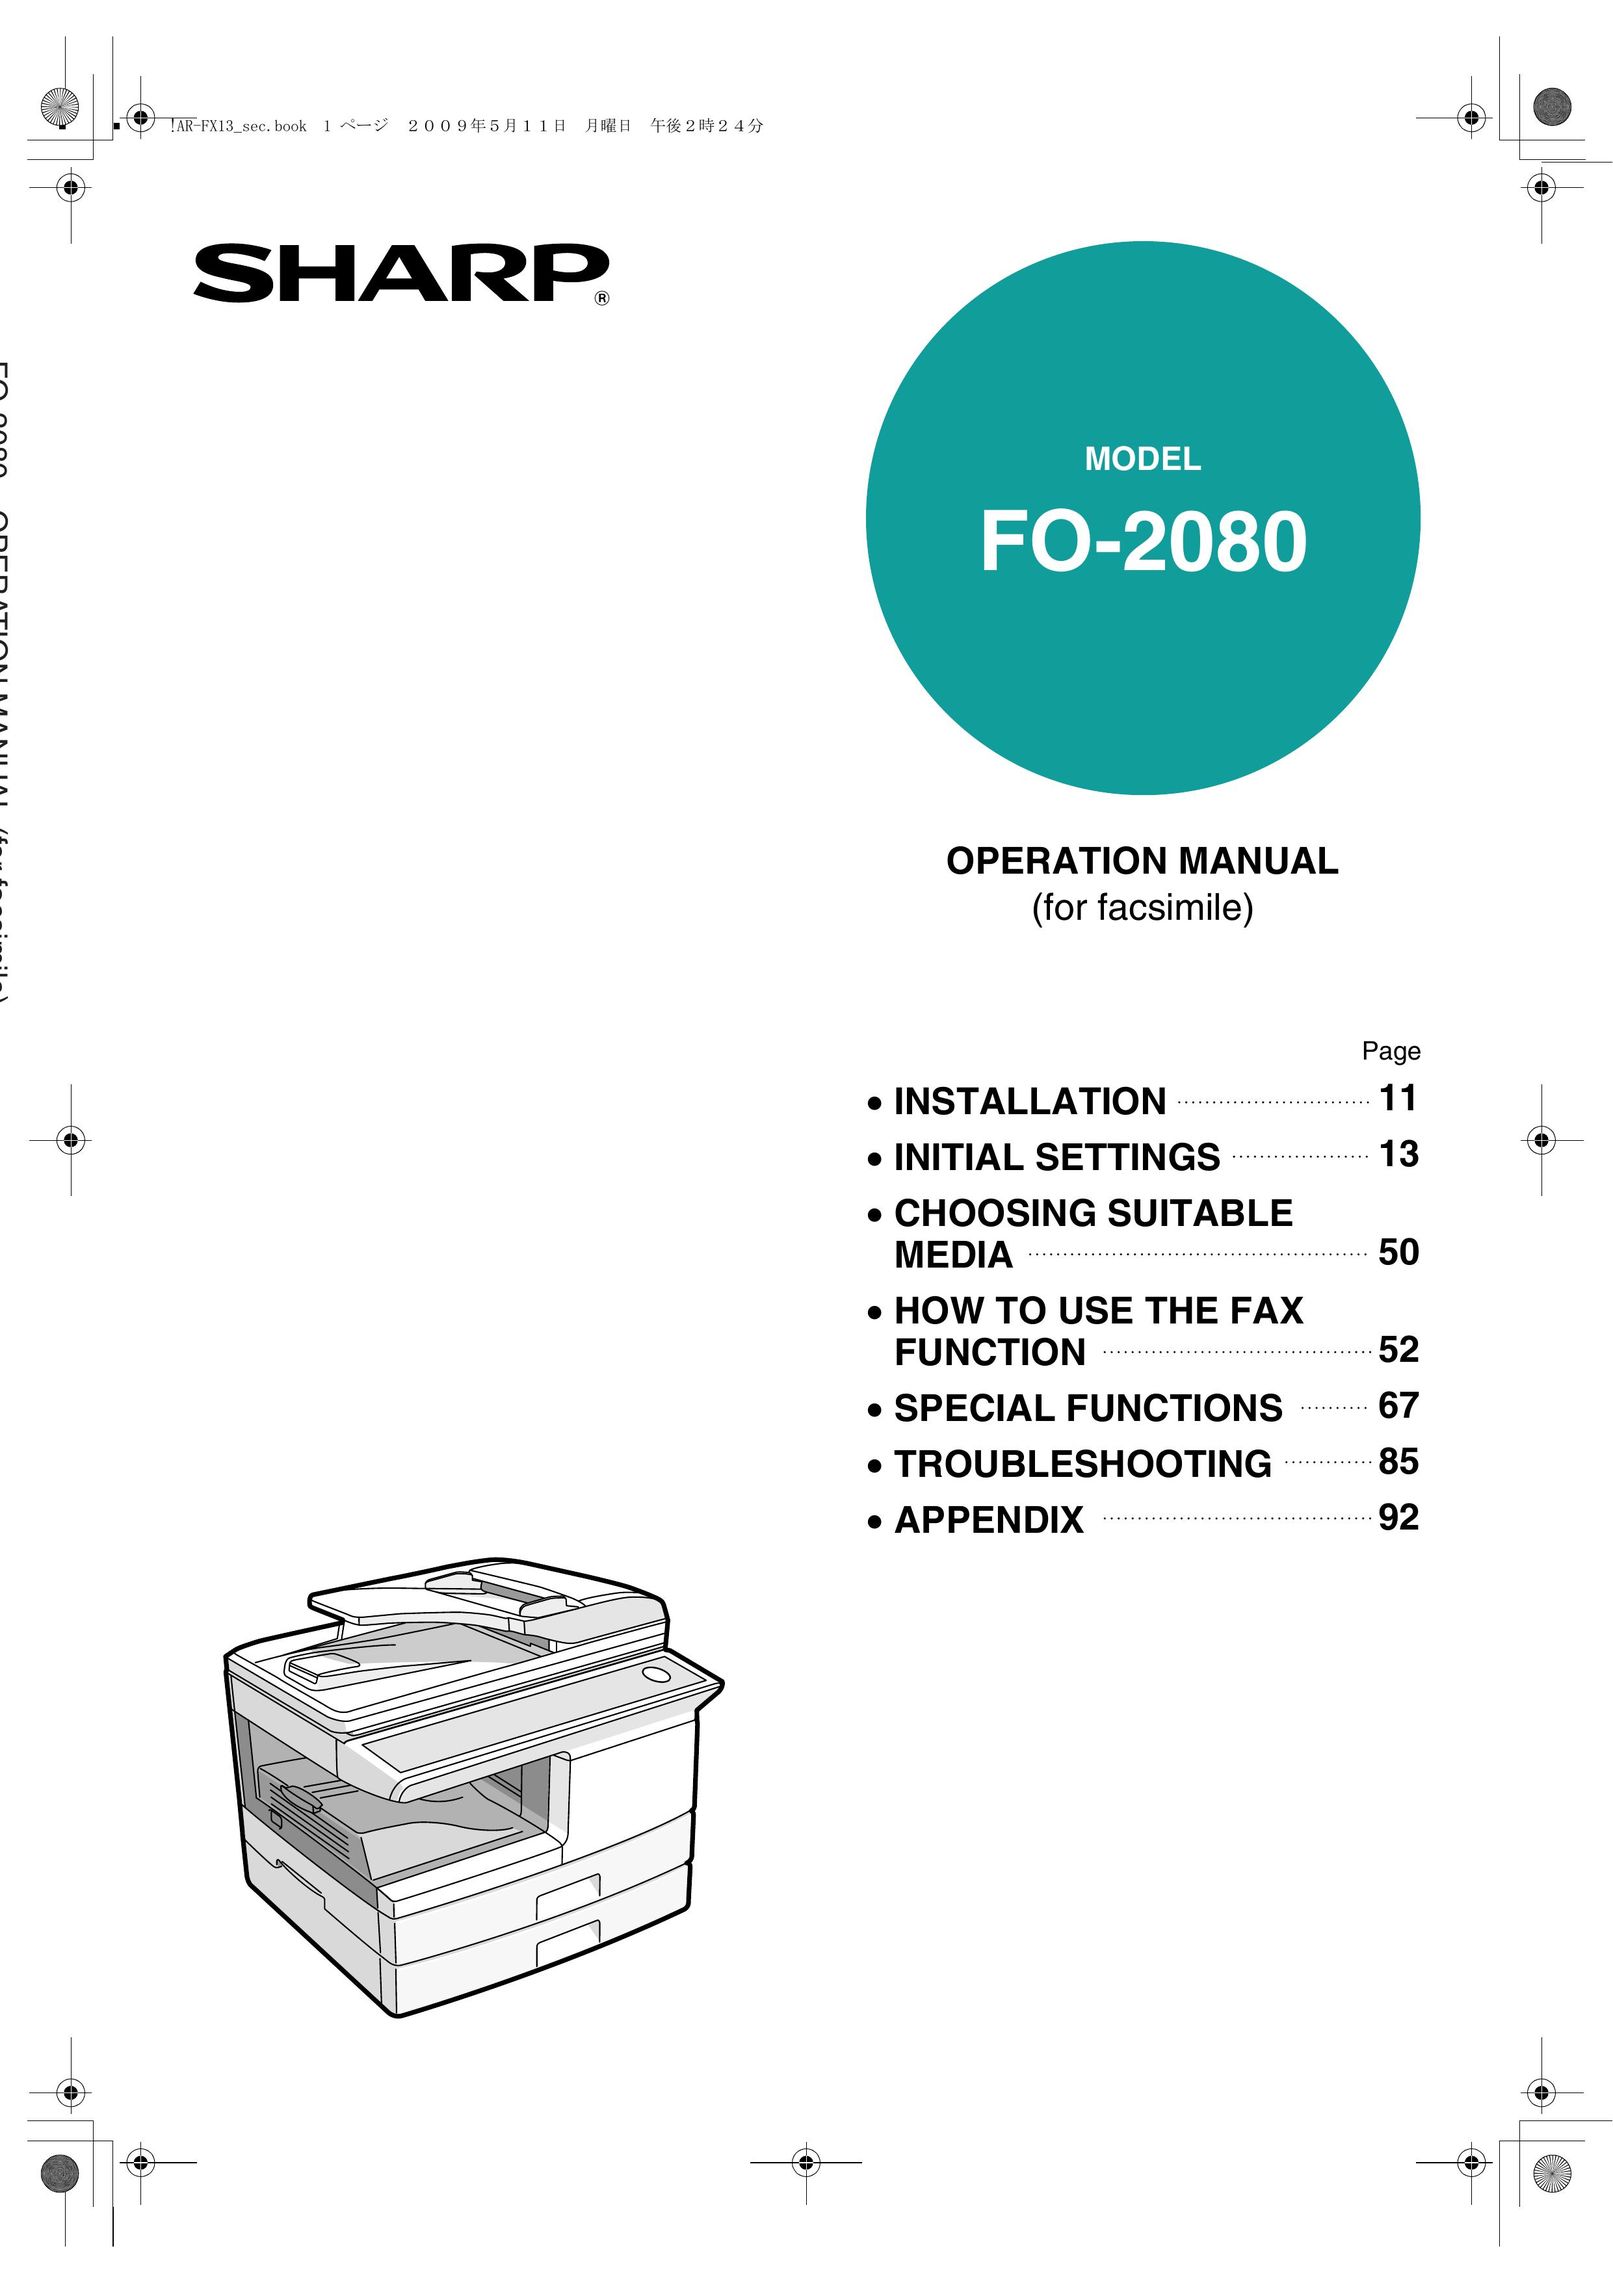 Sony FO-2080 All in One Printer User Manual